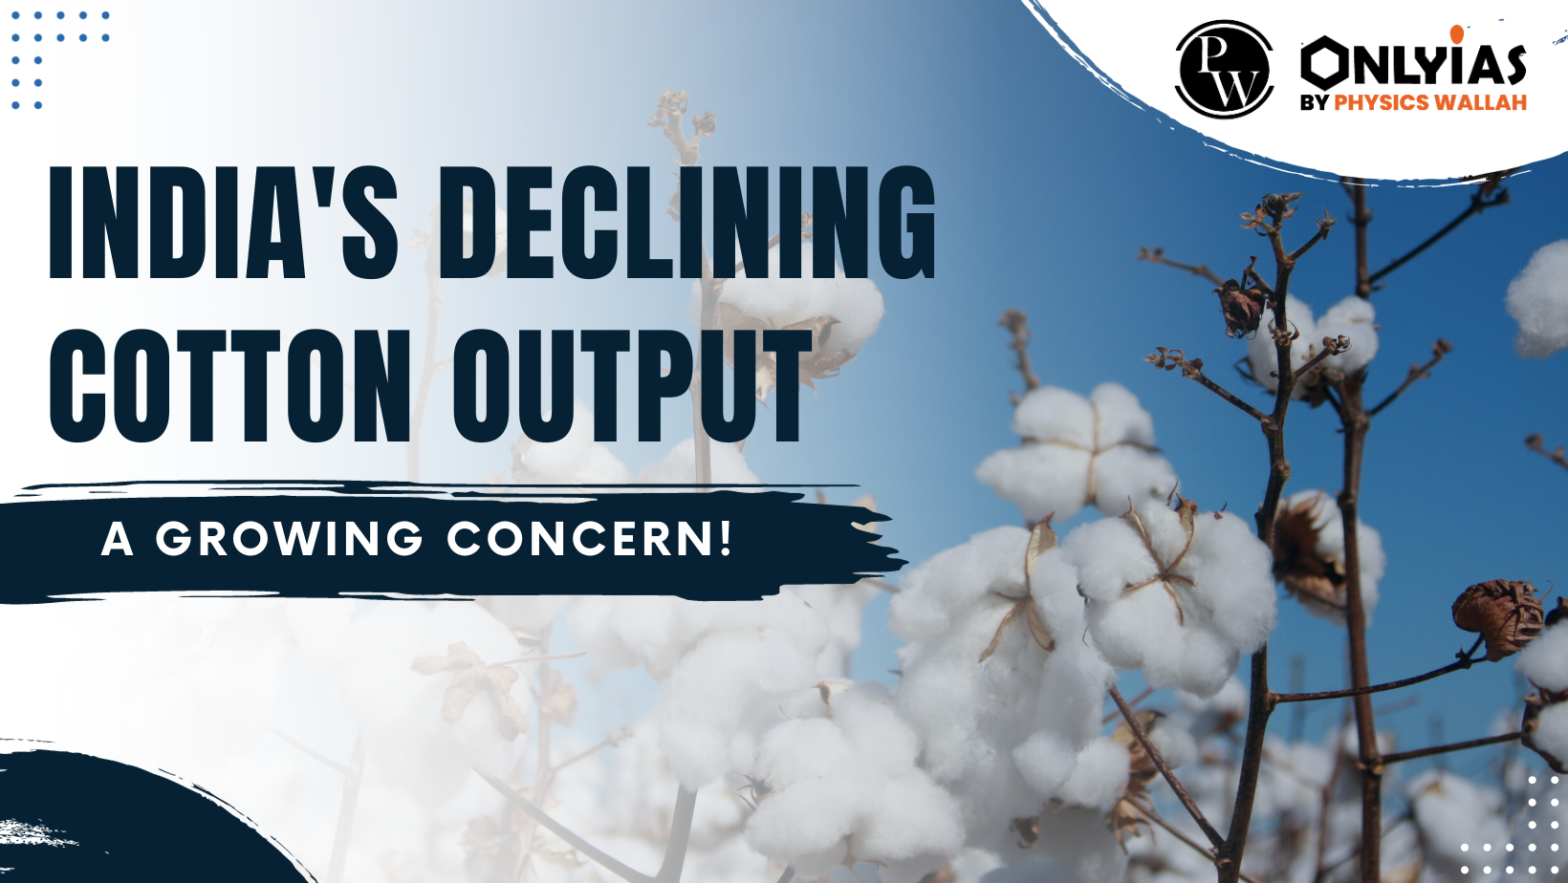 India’s Declining Cotton Output: A Growing Concern! PWOnlyIAS 2023